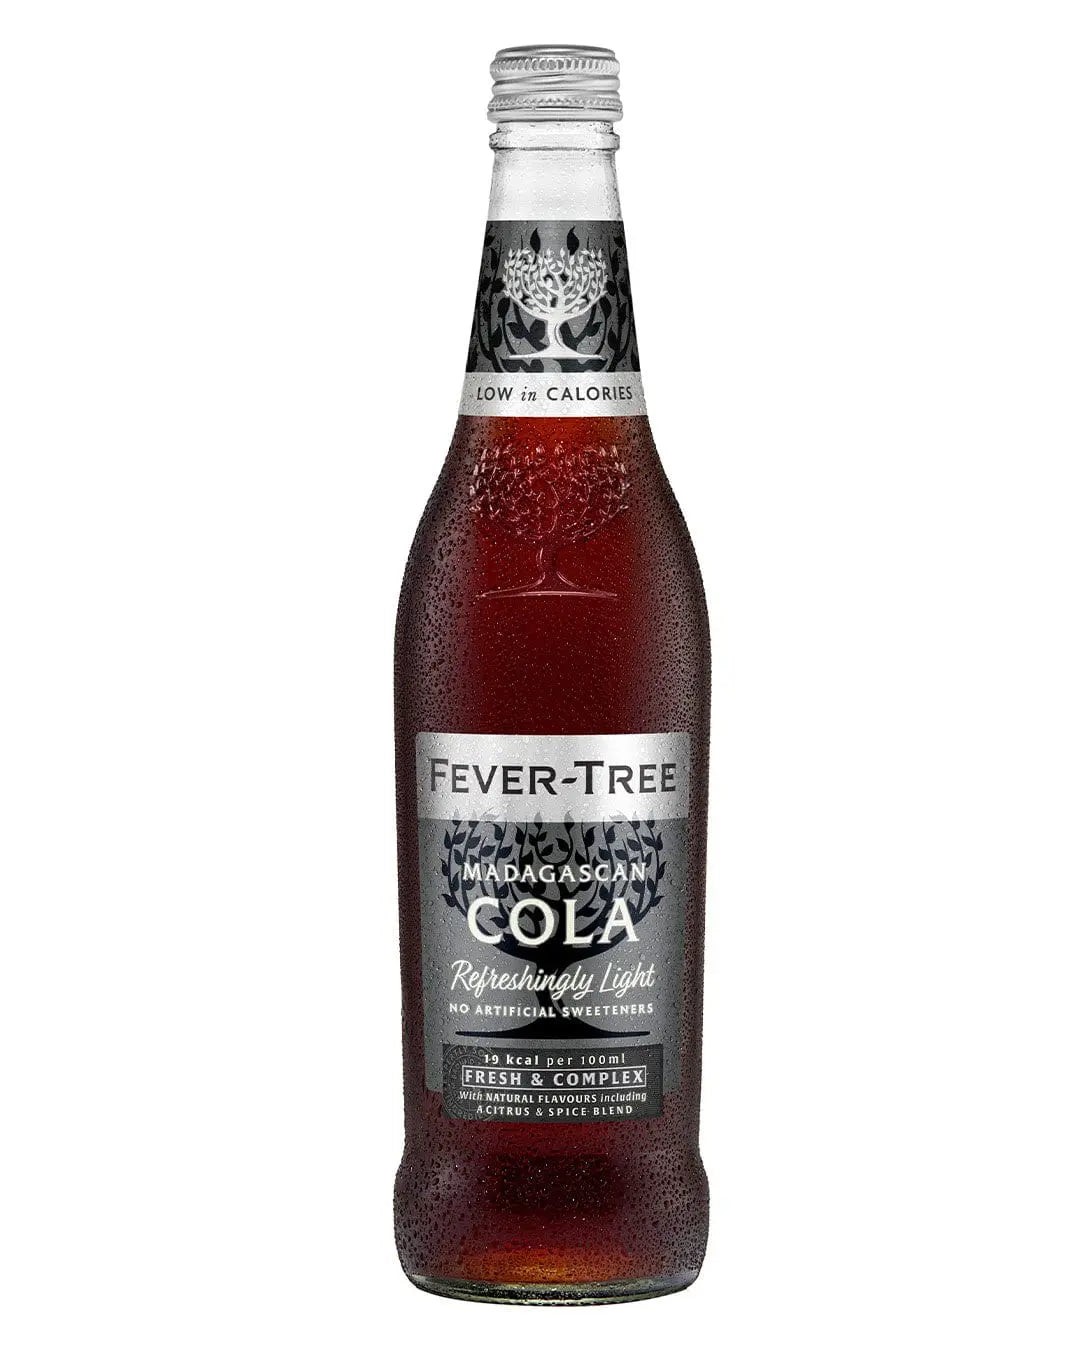 Fever-Tree Refreshingly Light Madagascan Cola, 500 ml Soft Drinks & Mixers